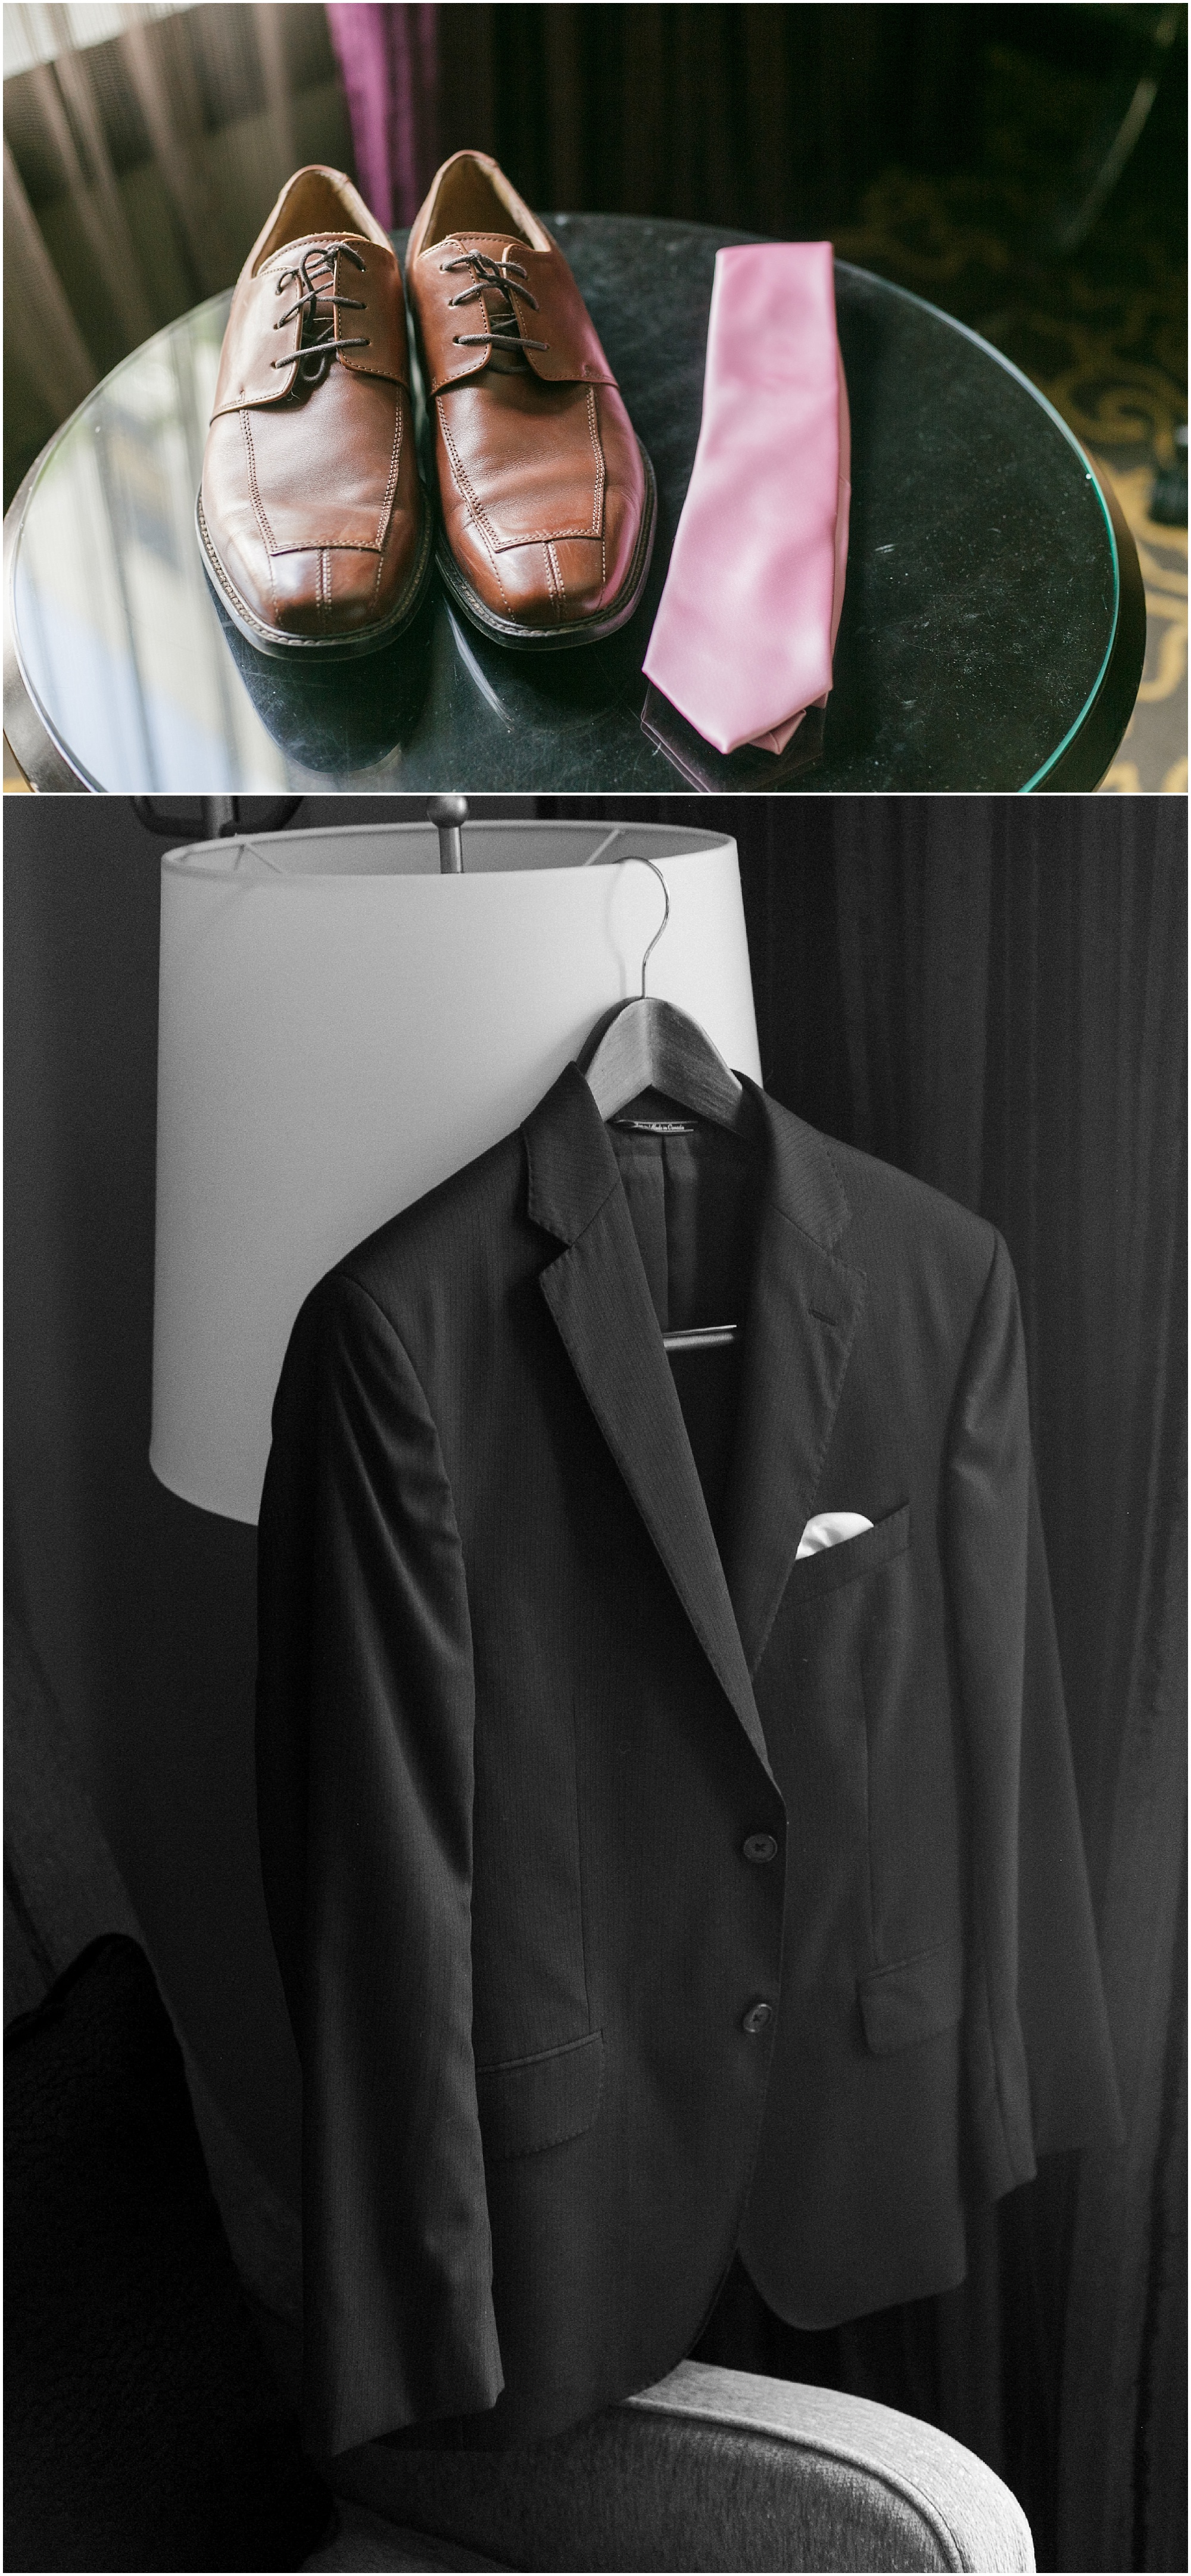 Grooms brown shoes and pink tie sitting on a glass table and a black and white photo of the groom's jacket hanging on a lamp. 